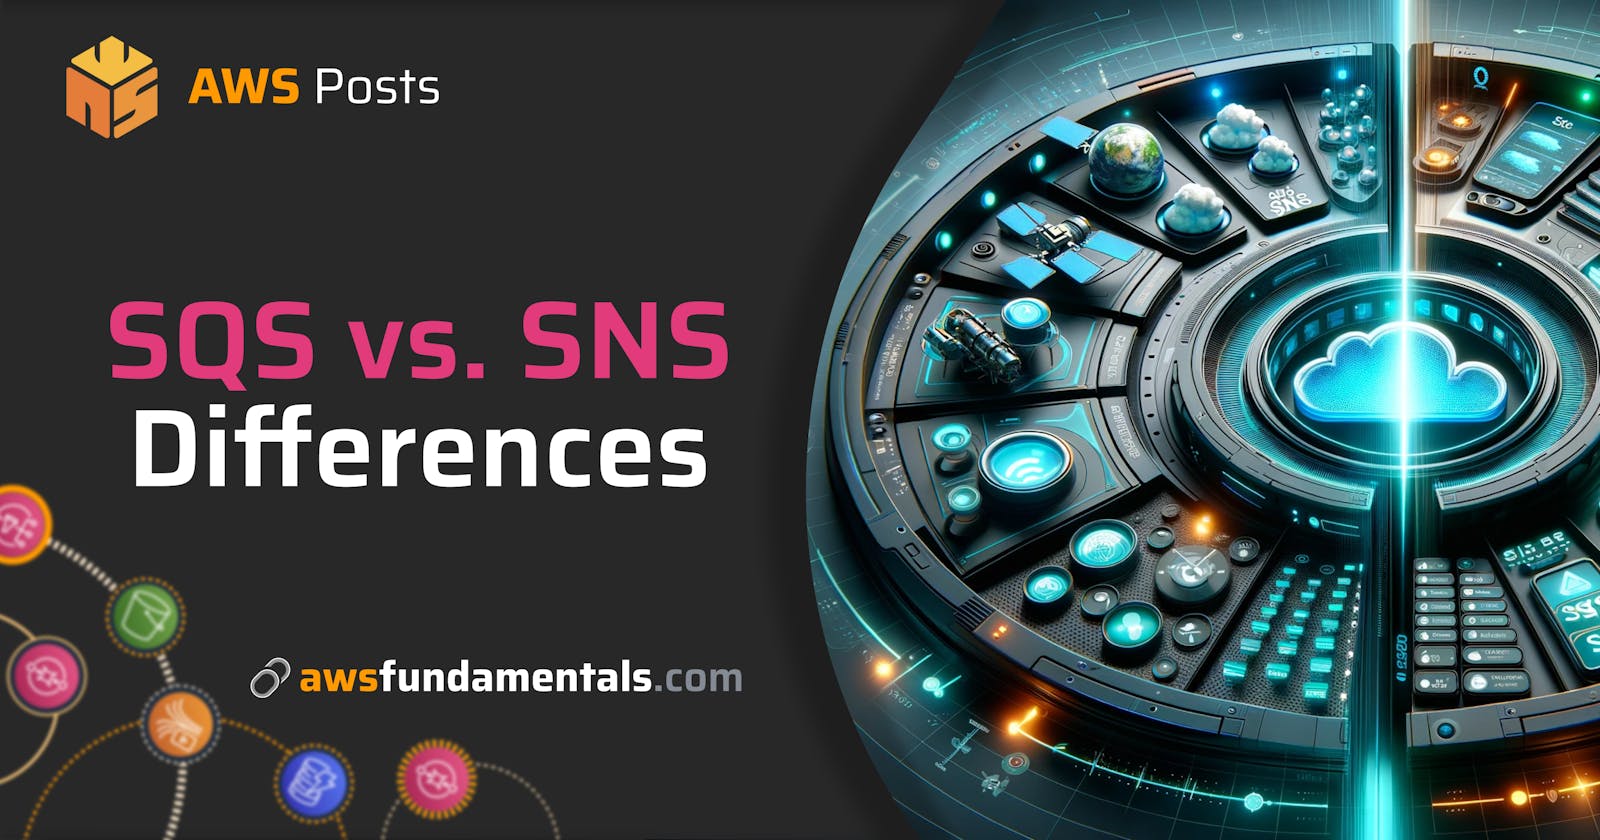 AWS SNS vs. SQS - What Are the Main Differences?